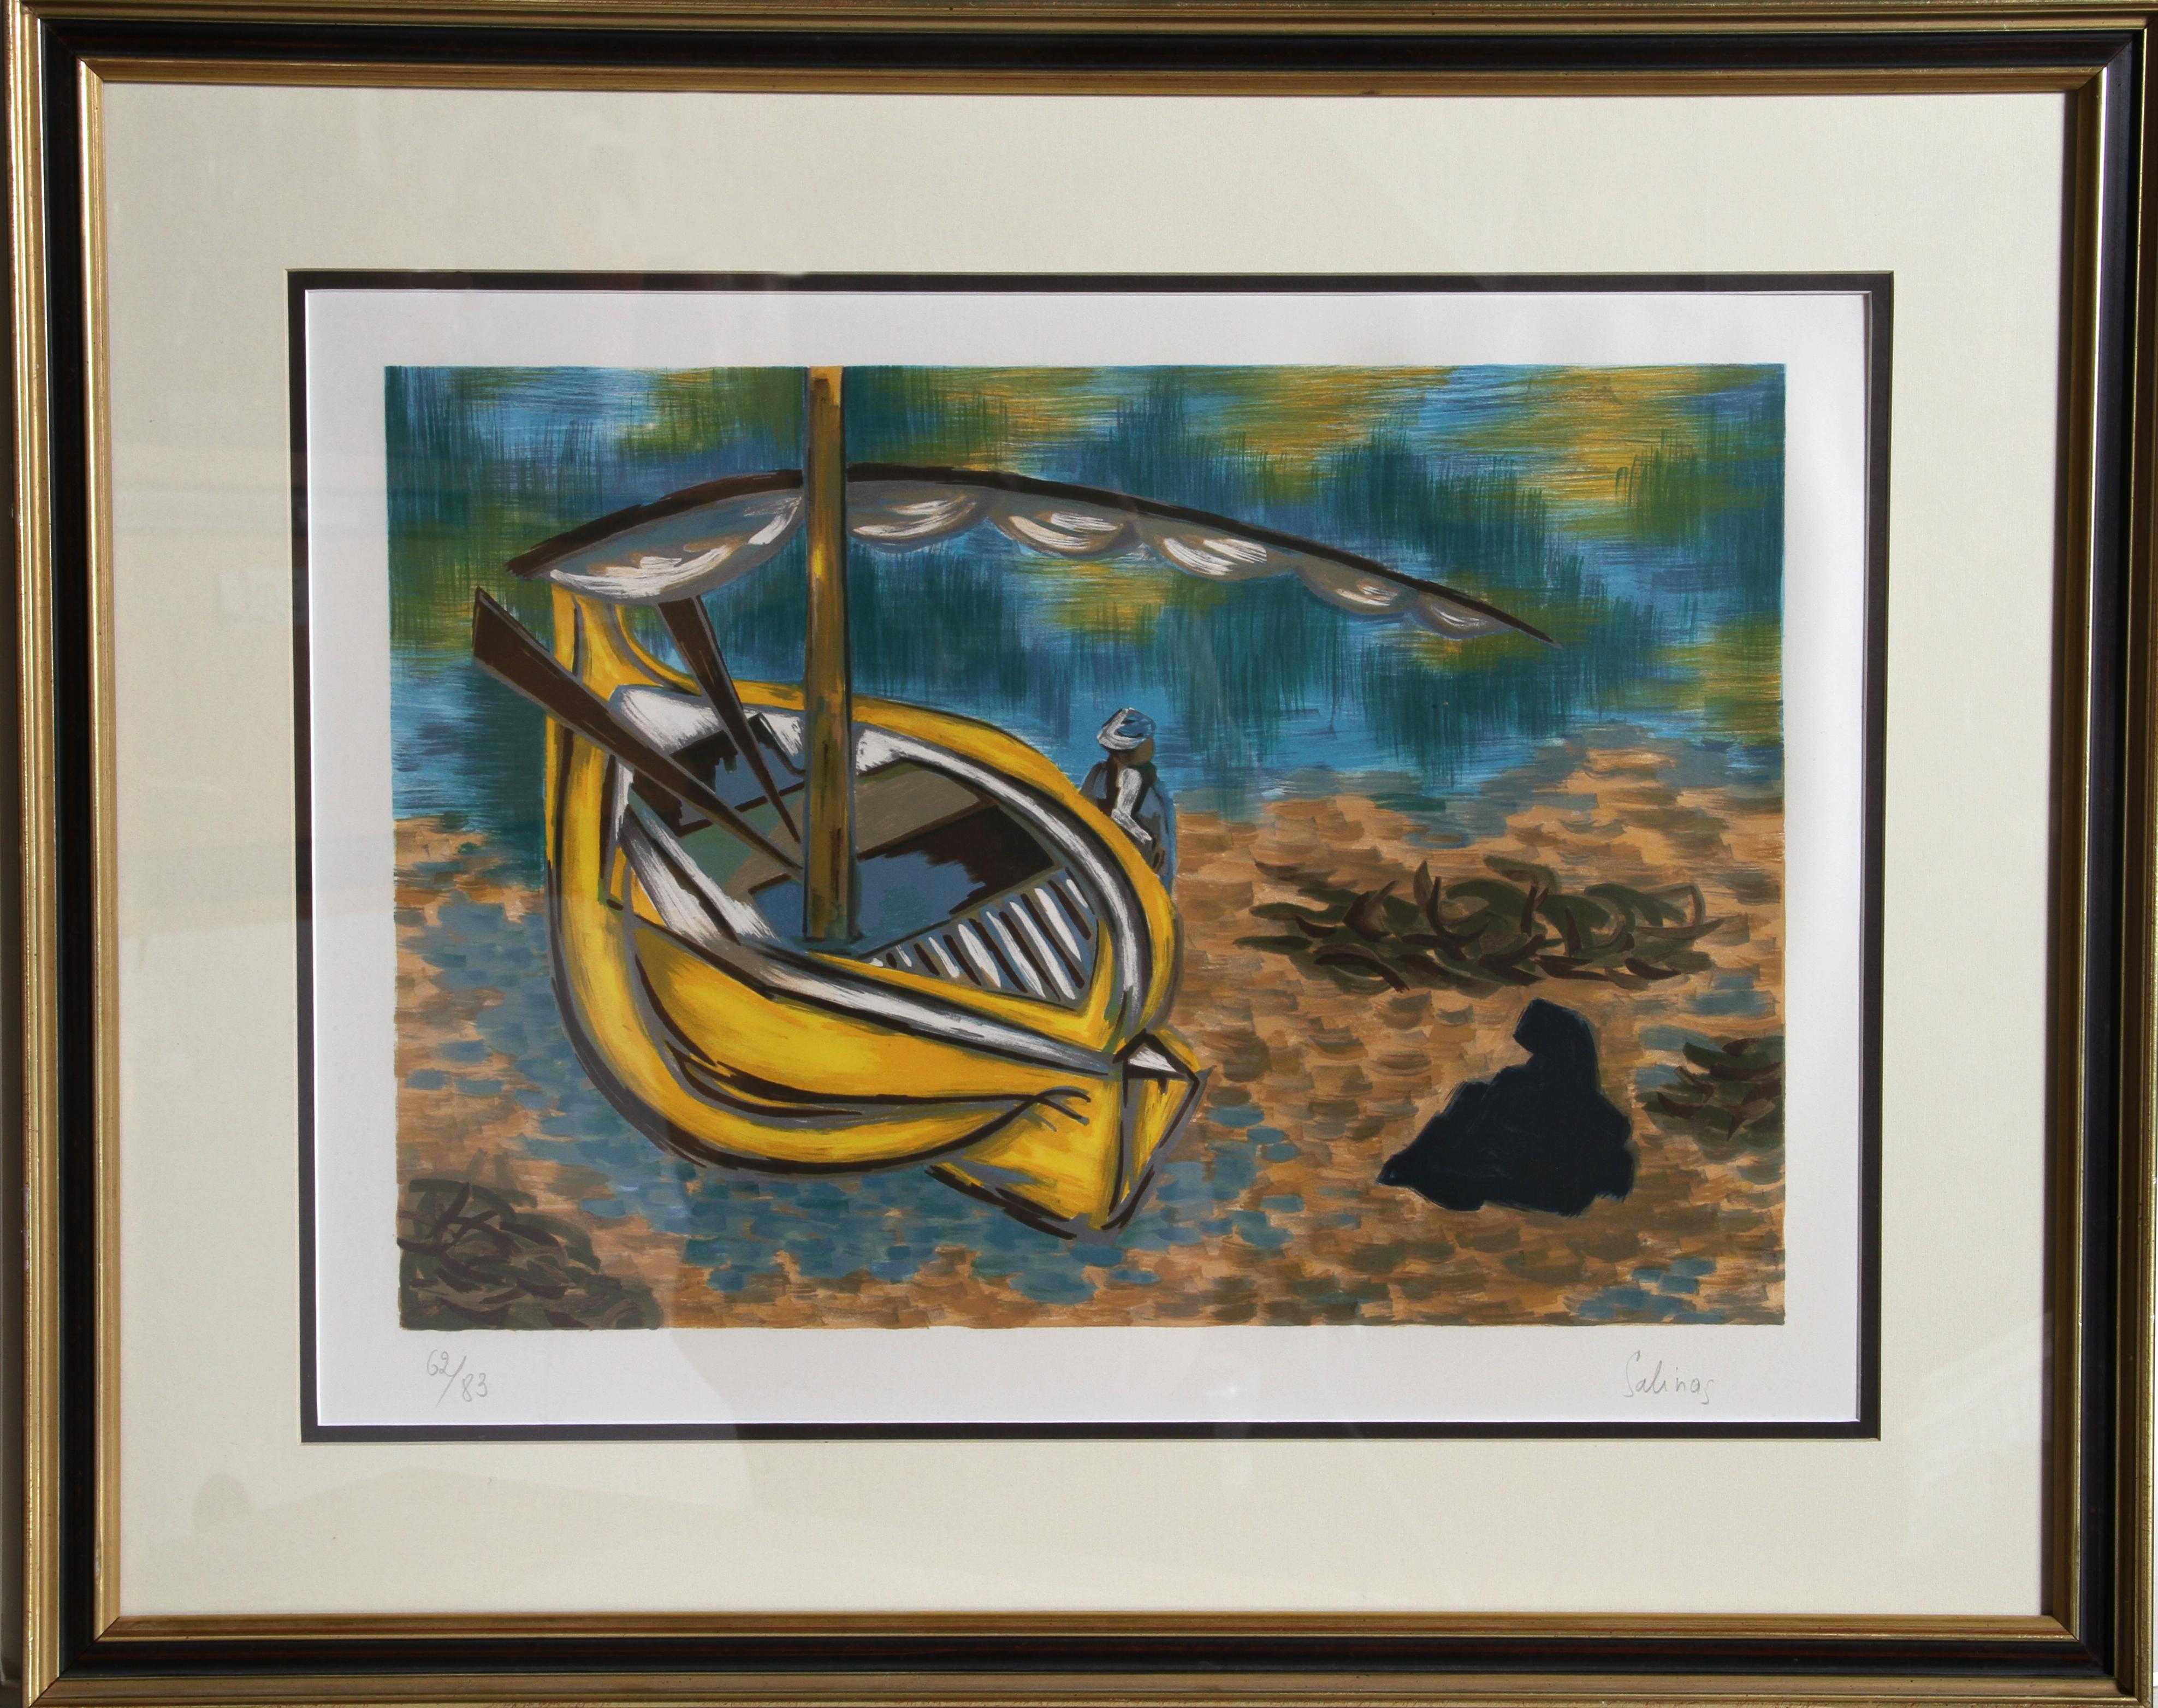 Laurent Marcel Salinas, Egyptian/French (1913 - 2010) -  Bateau. Medium: Lithograph, signed and numbered in pencil, Edition: 62/83, Image Size: 16 x 21 inches, Size: 19 x 25 in. (48.26 x 63.5 cm), Frame Size: 24  x 30 in. (60.96  x 76.2 cm) 